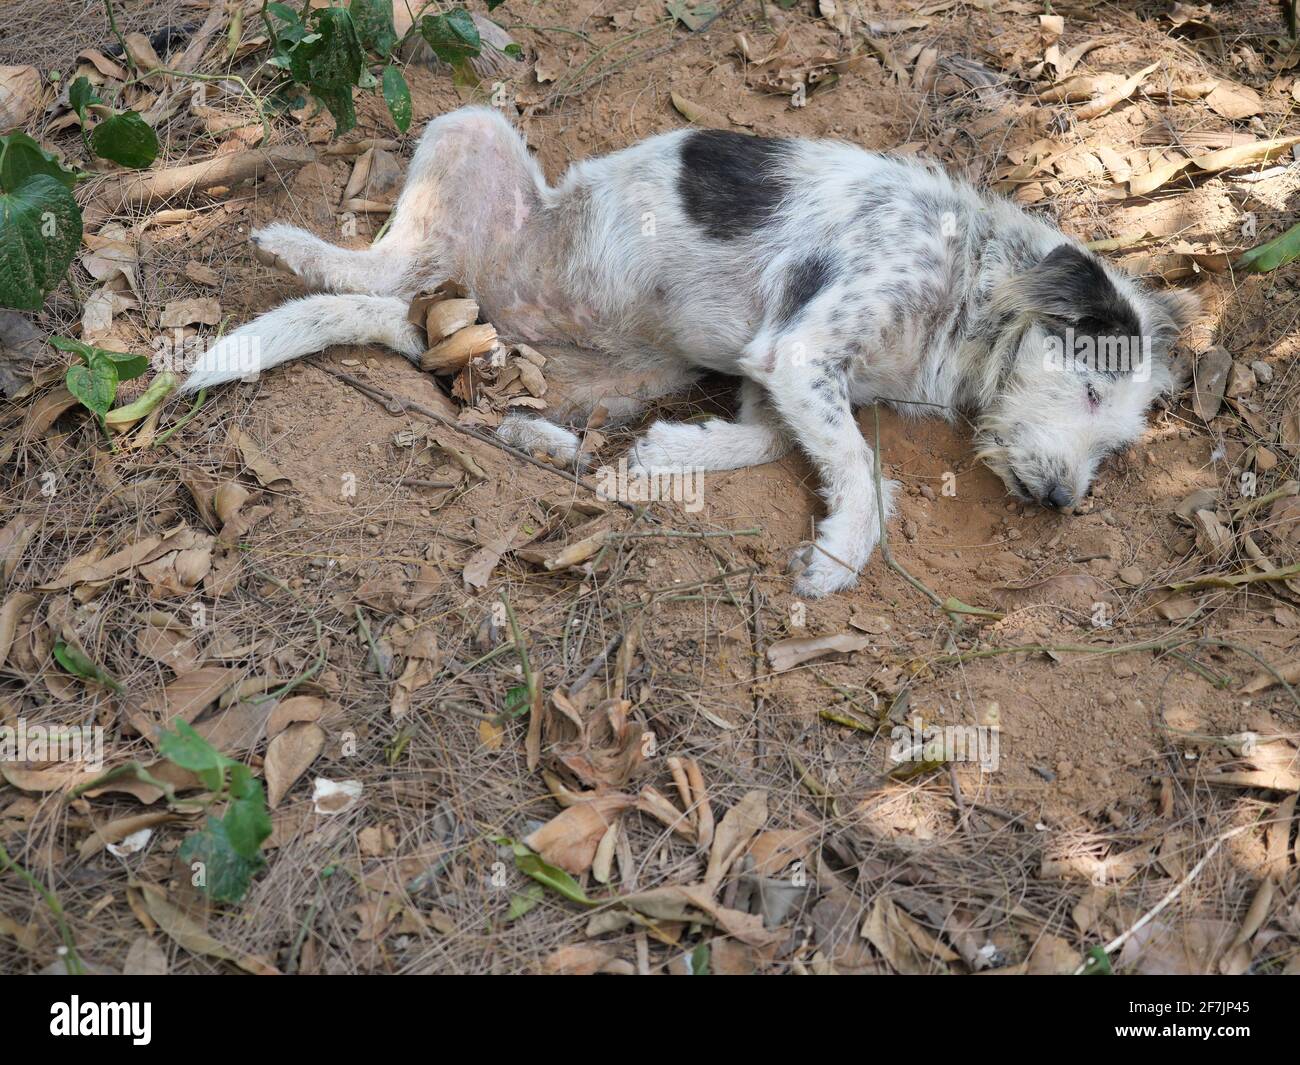 White and black striped dog resting in dug hole where it dig, Natural behavior of outdoor pets Stock Photo